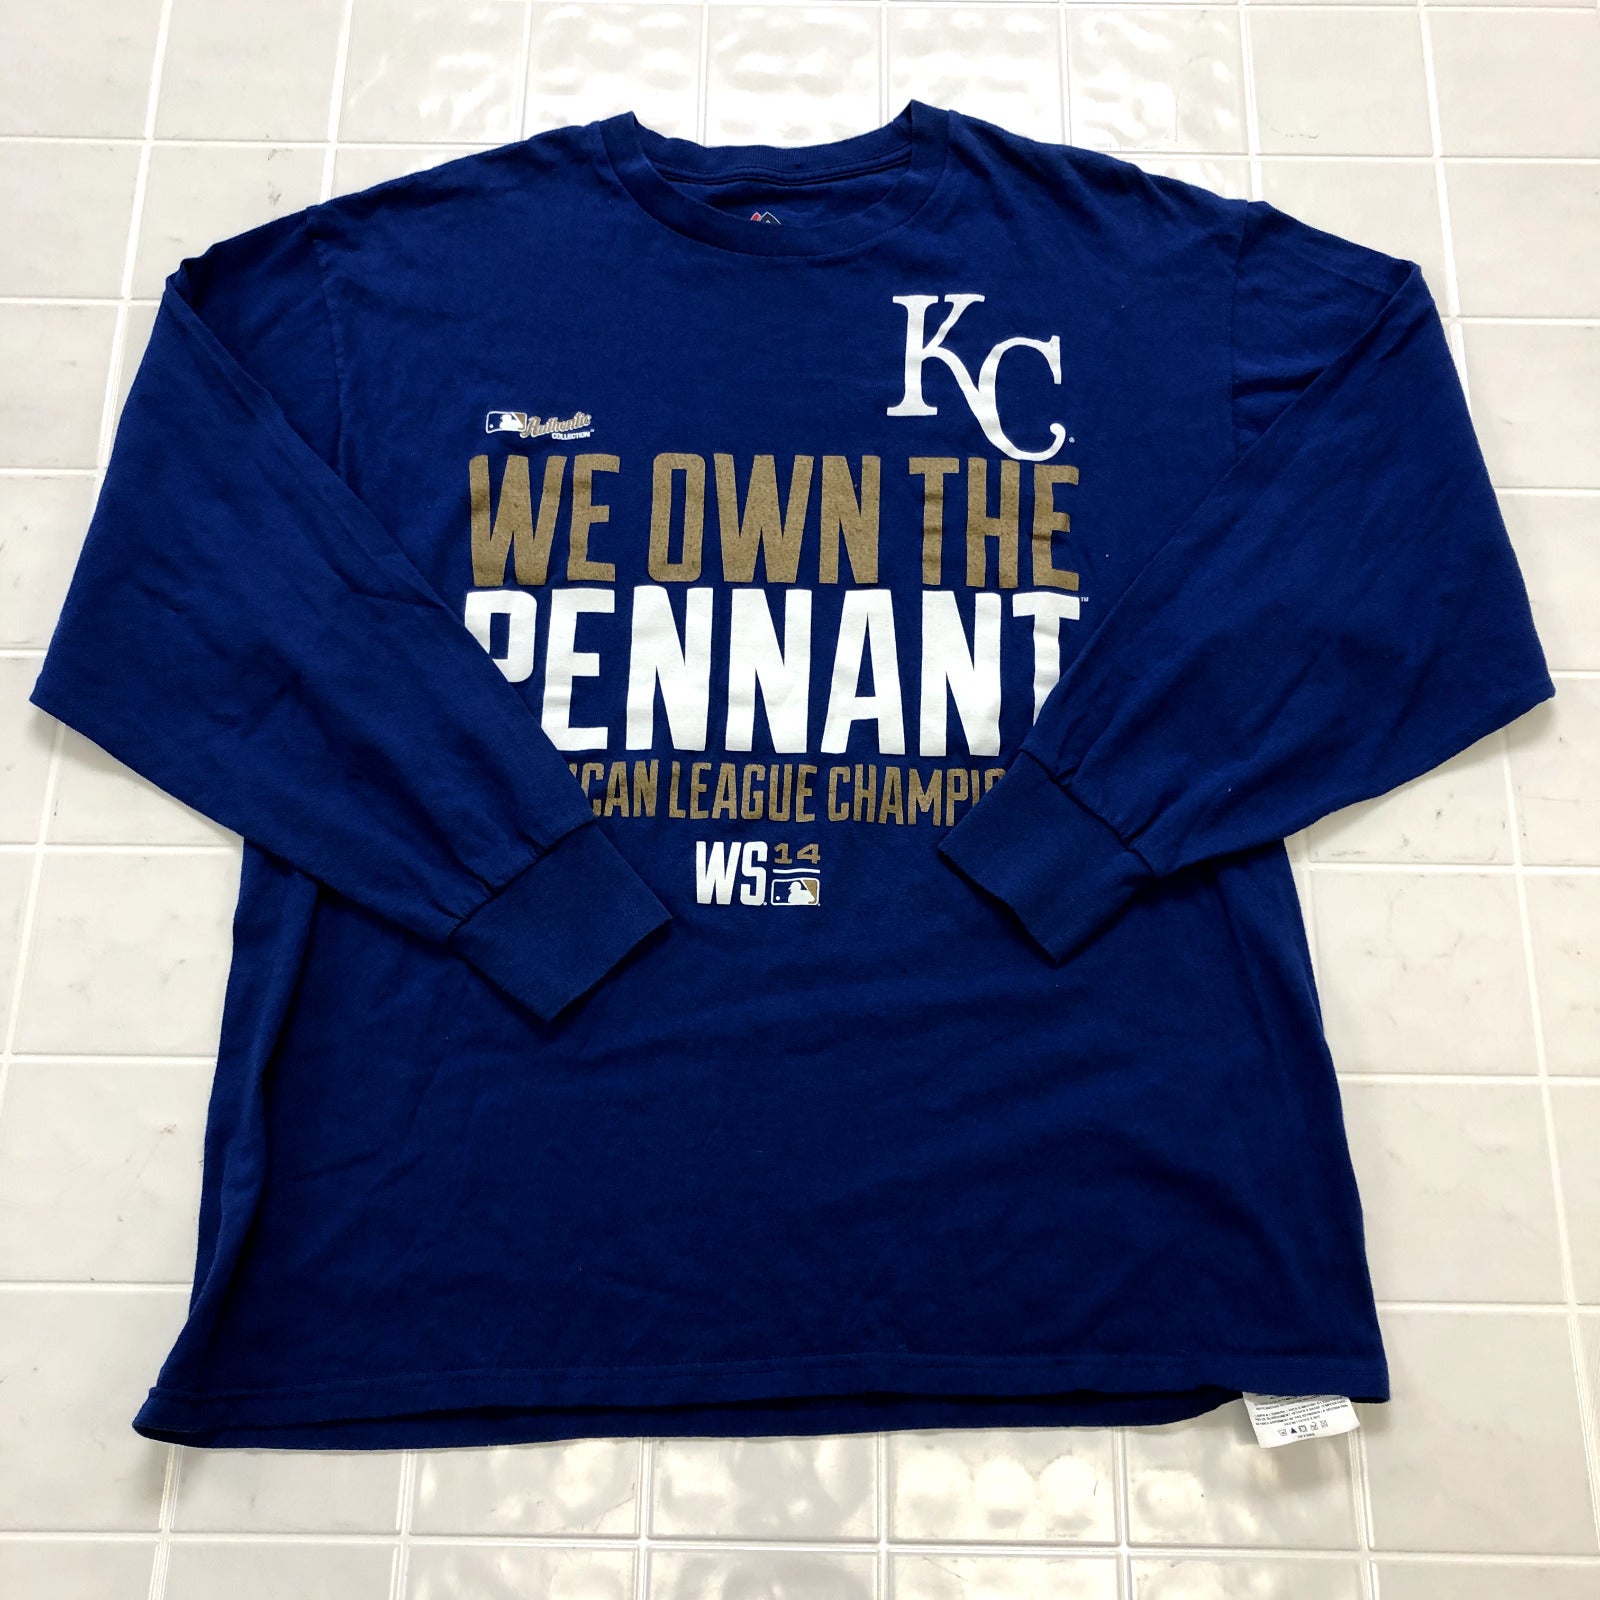 Majestic Blue Kansas City Royals We Own The Pennant T-shirt Adult Size XL